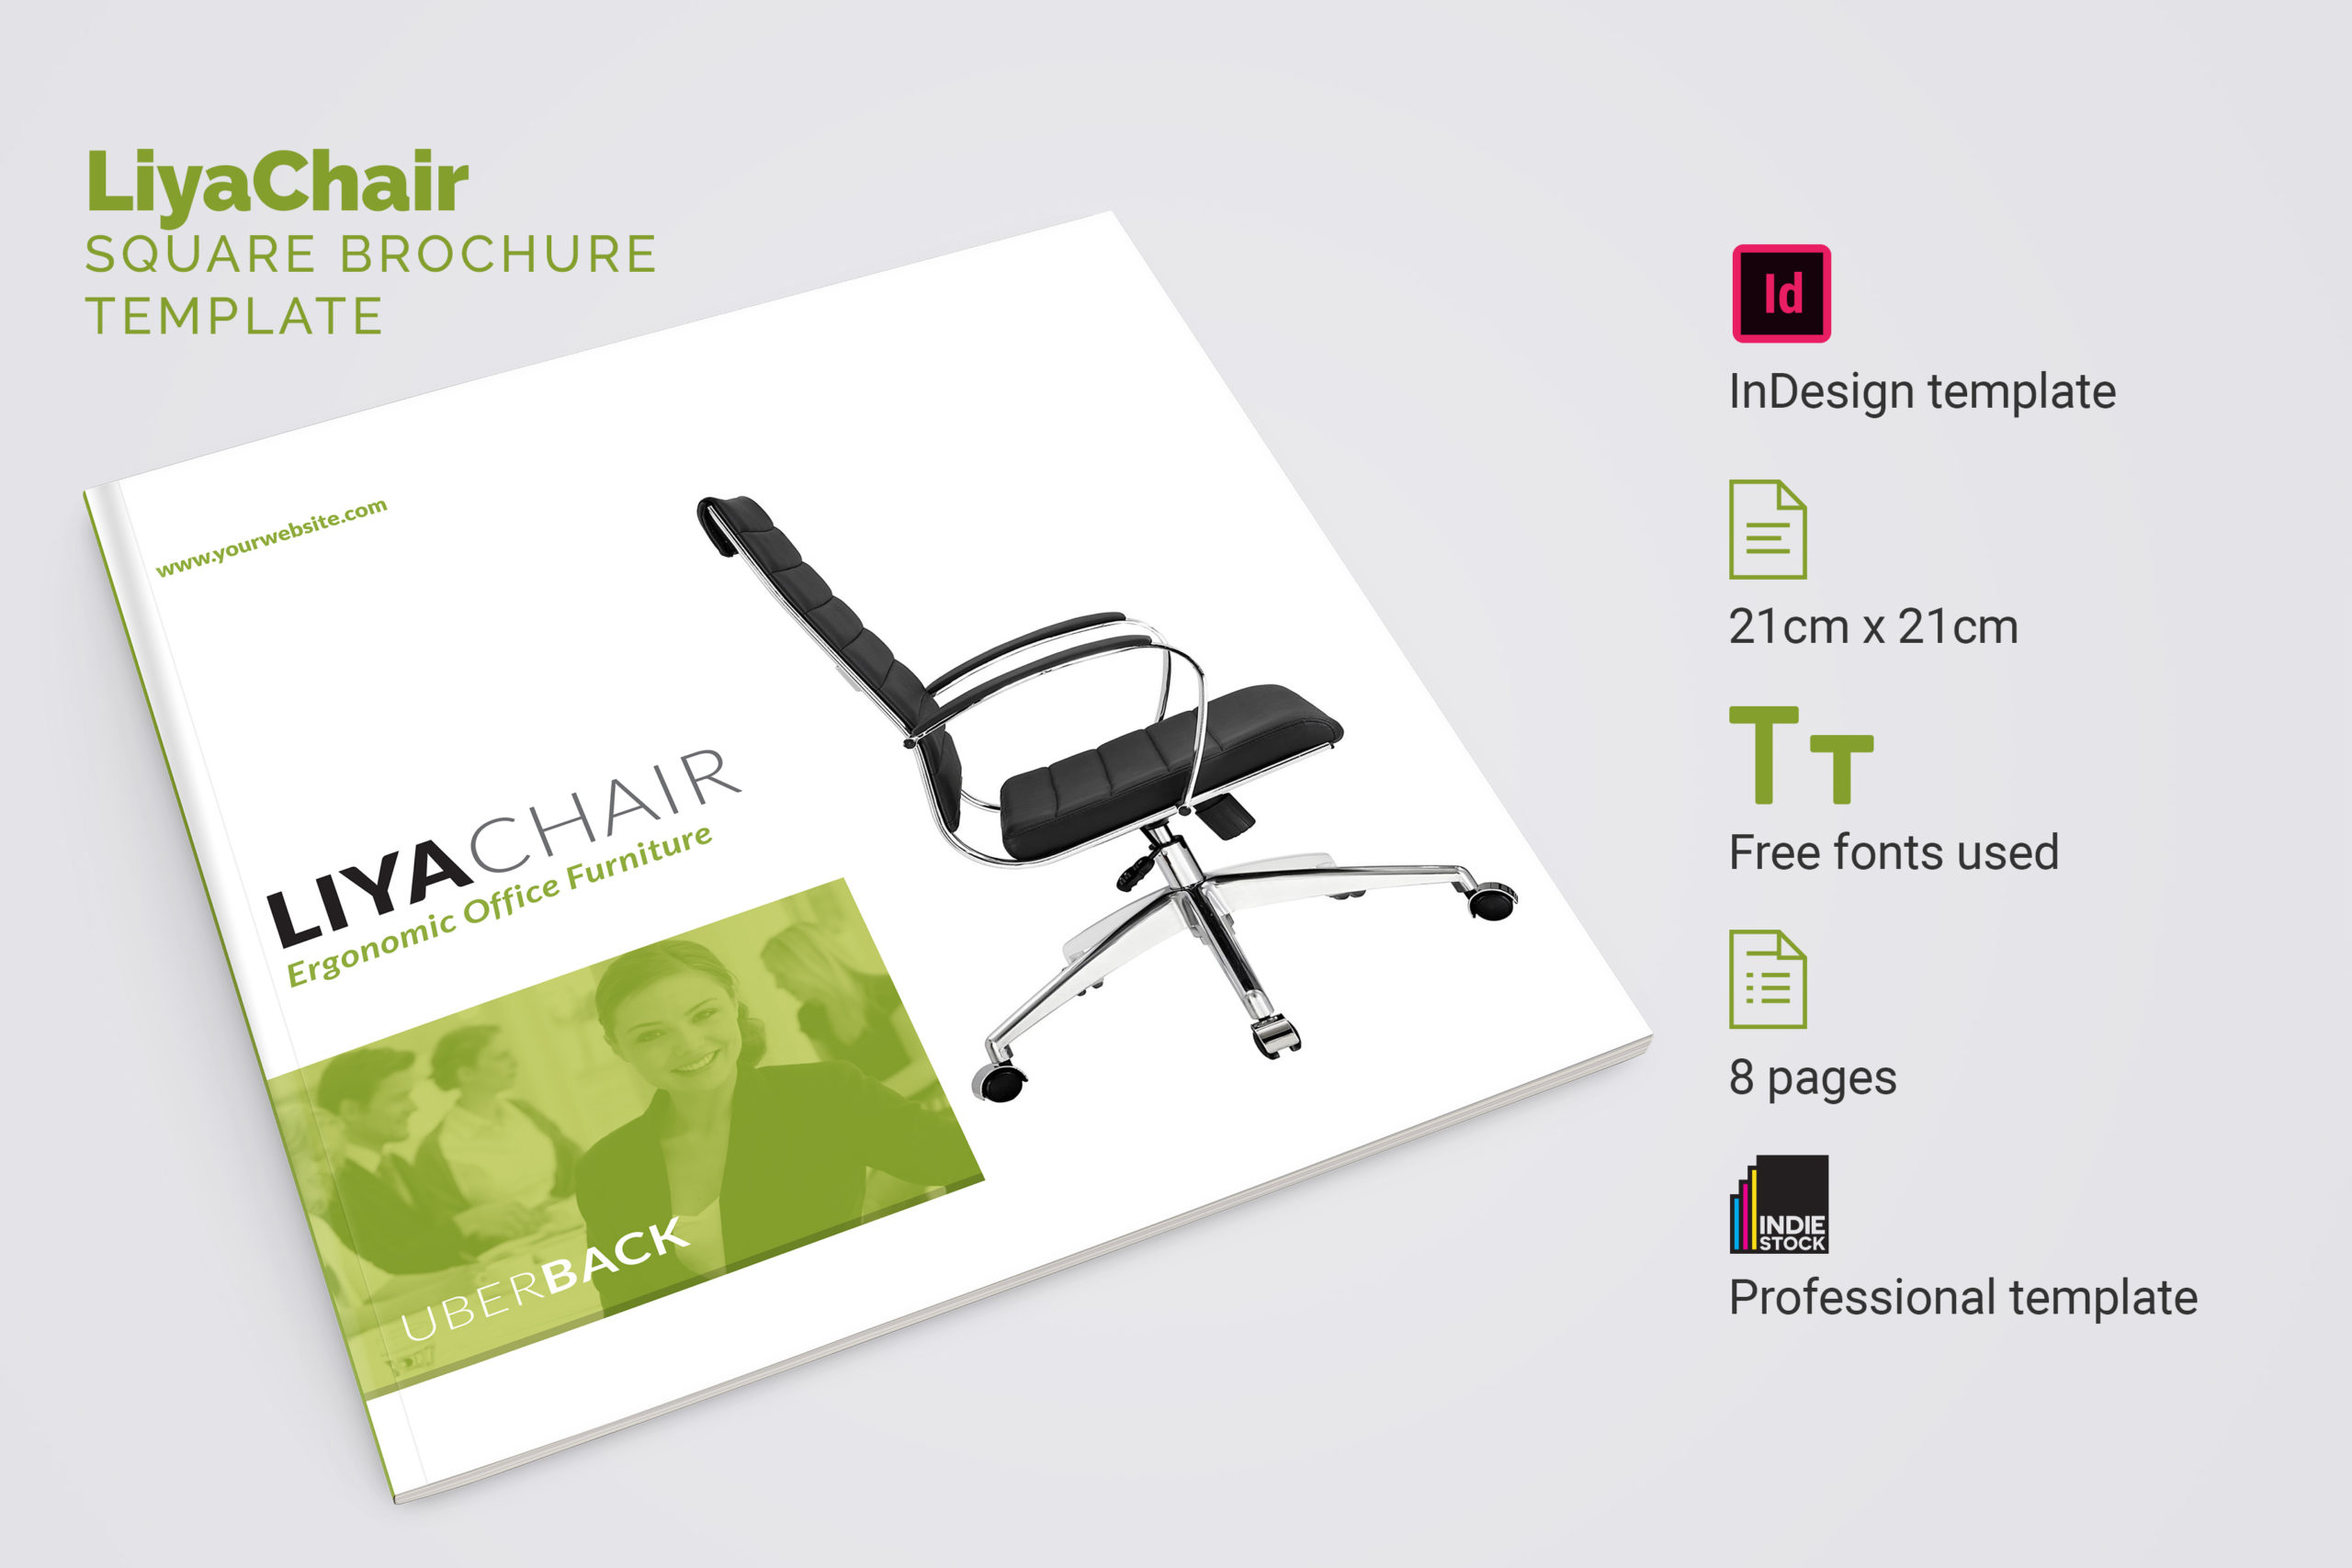 LiyaChair - Square Brochure InDesign template